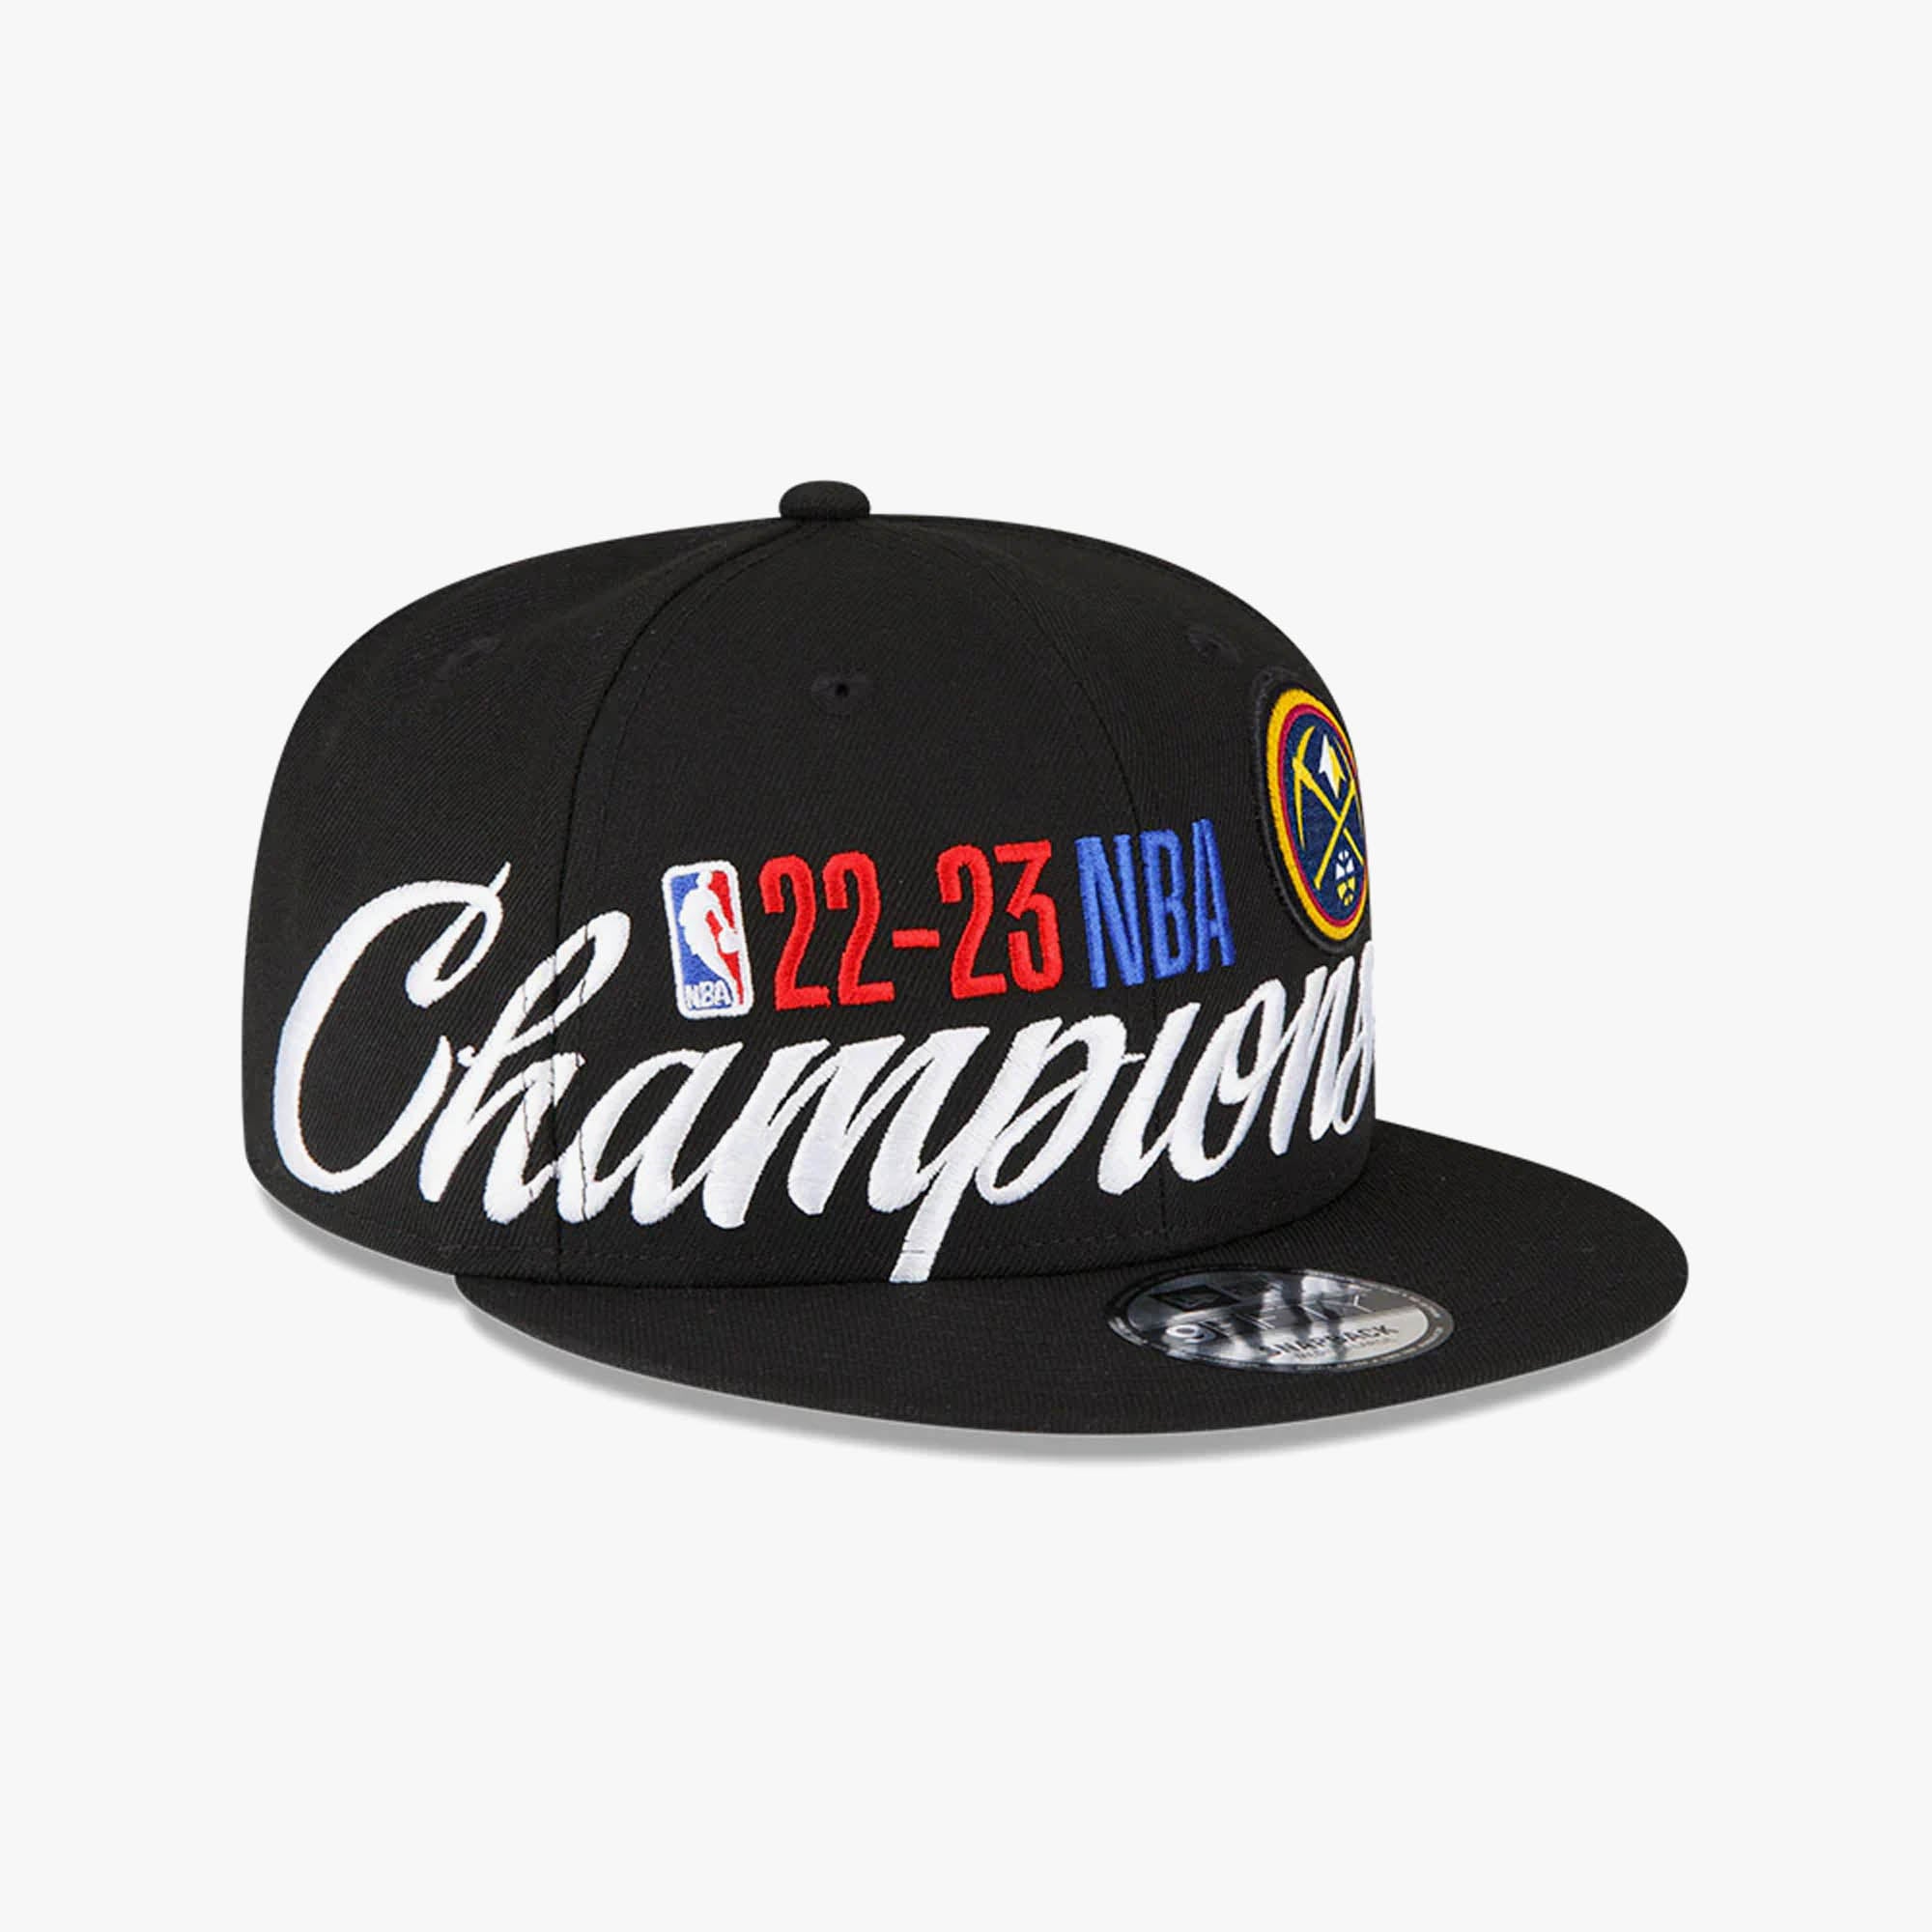 47 BRAND Cleveland Cavaliers '47 MVP Snapback Hat - NATURAL